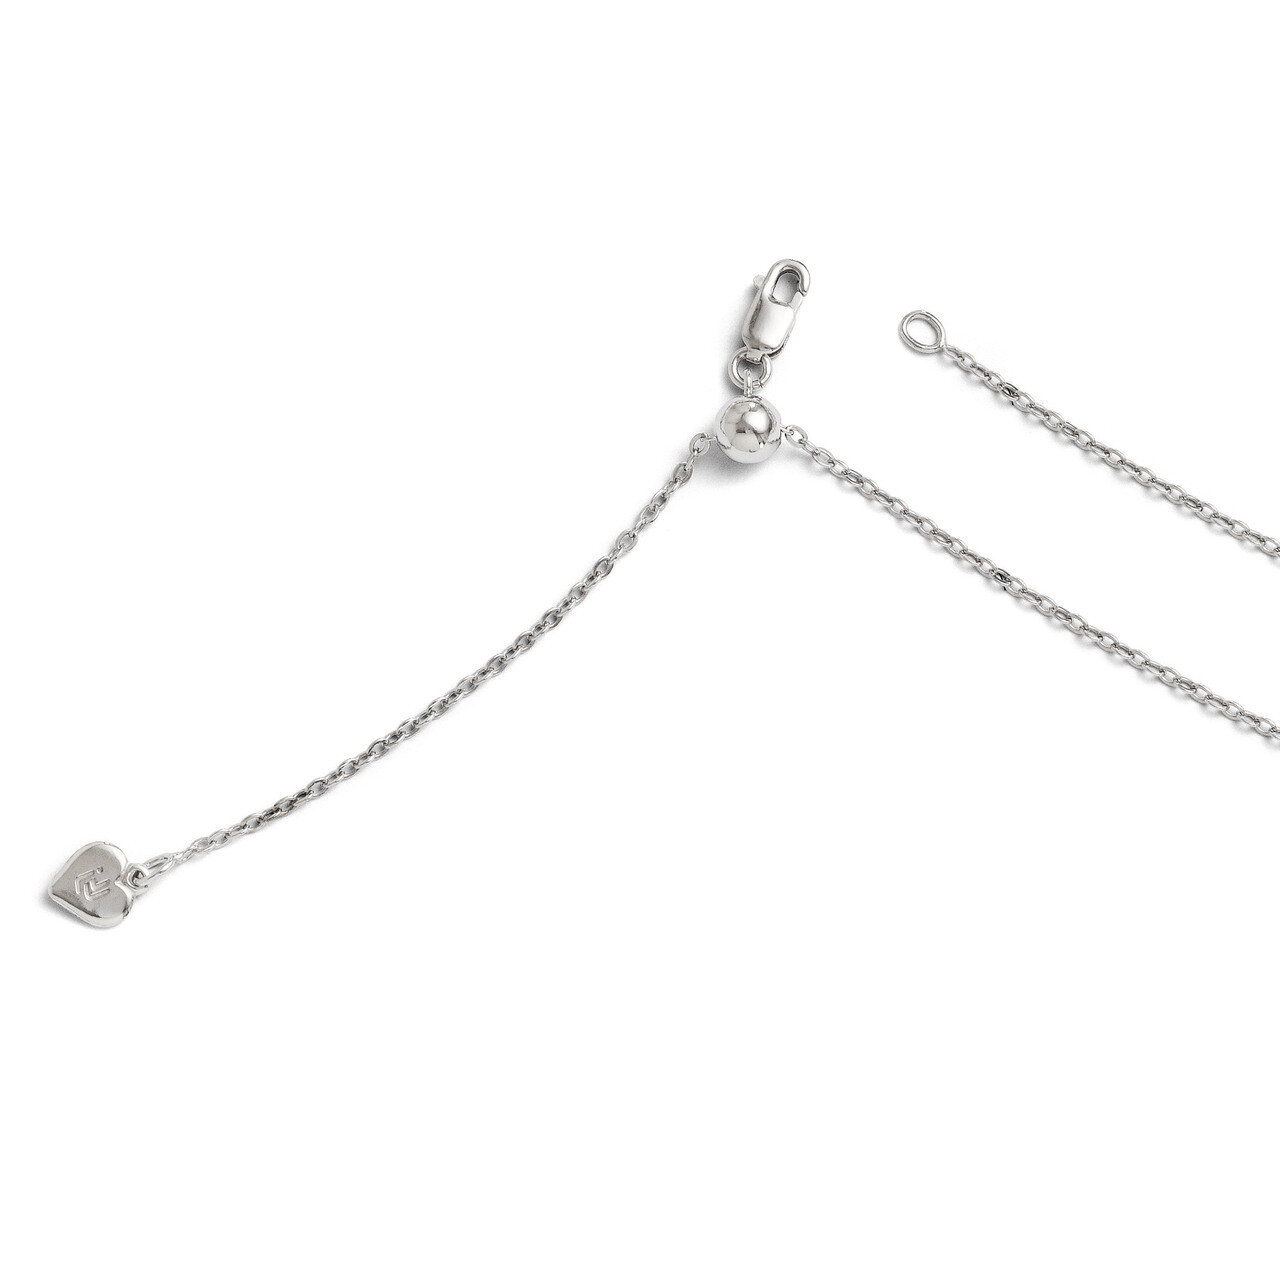 Adjustable Cable Chain 30 Inch - Sterling Silver HB-FC13-30